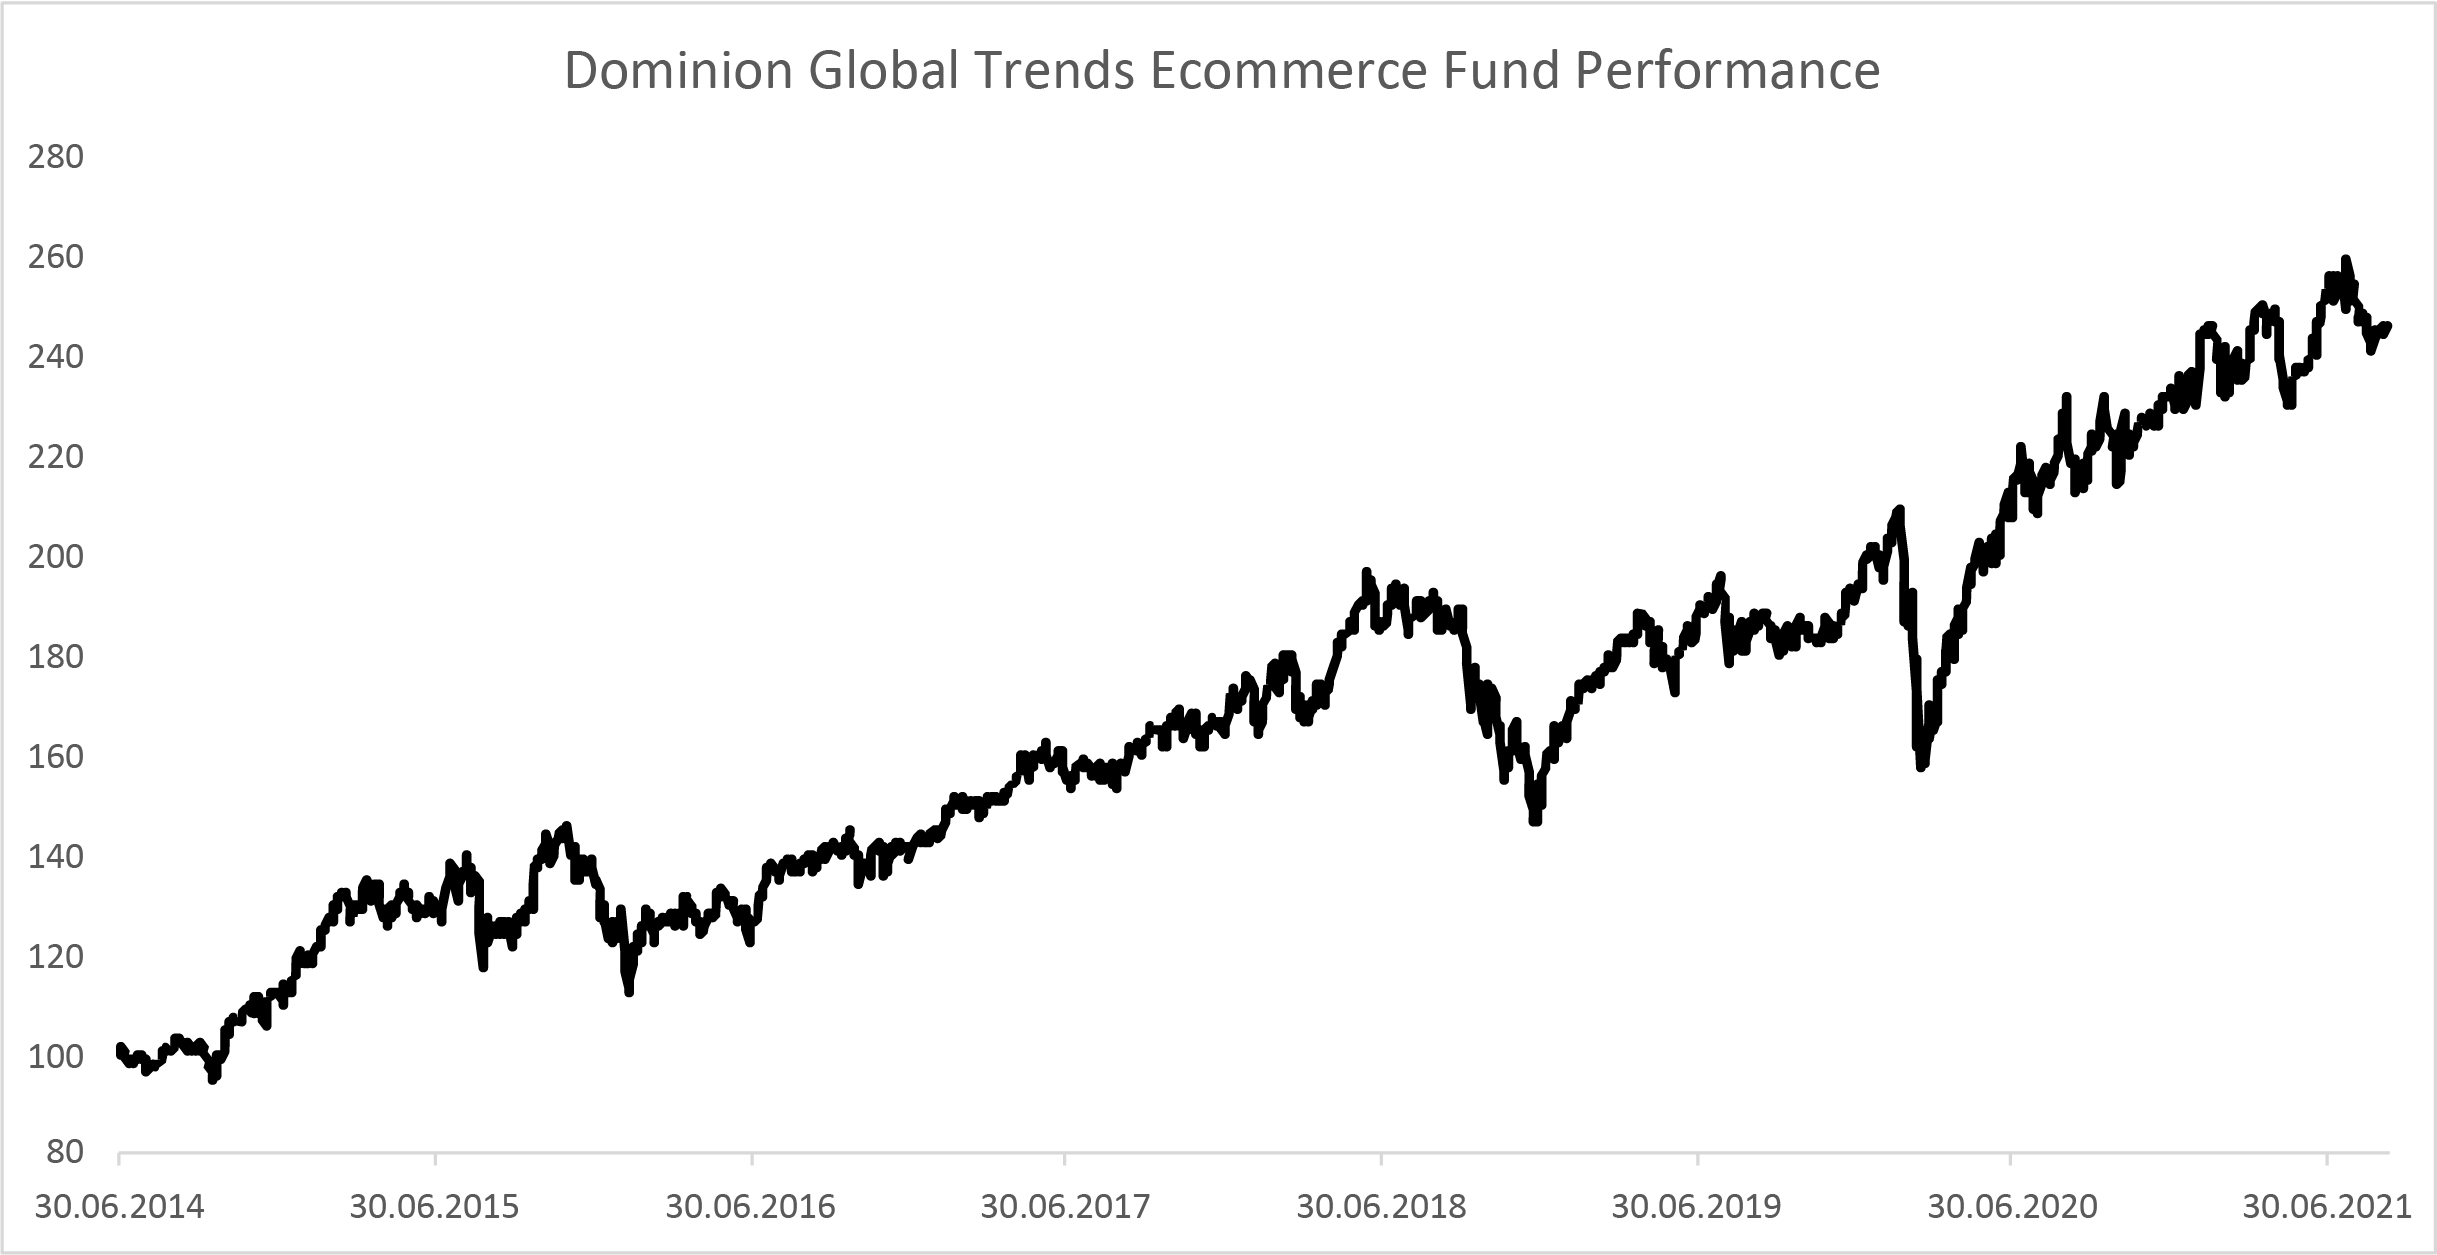 Dominion Global Trends Ecommerce Euro Fund I Class. <br/> Source: Bloomberg, as of 09.09.2021